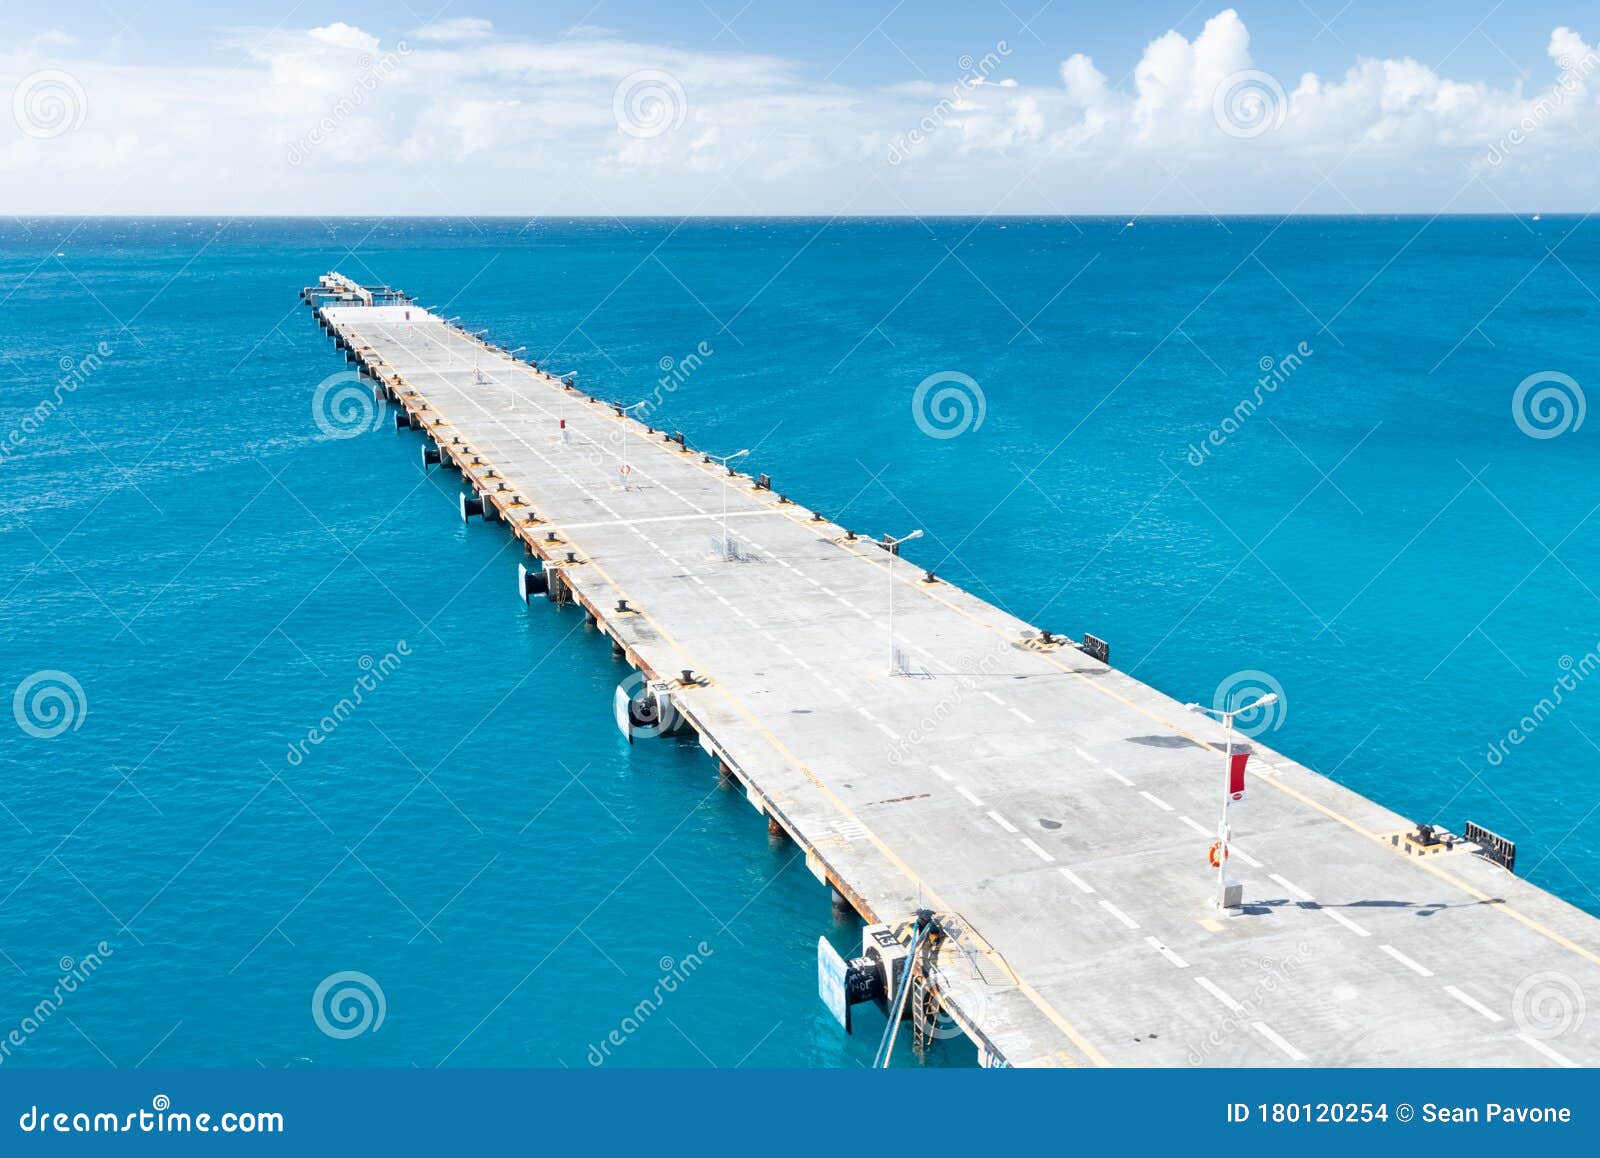 Jetty at a Port stock photo. Image of afternoon, large - 180120254